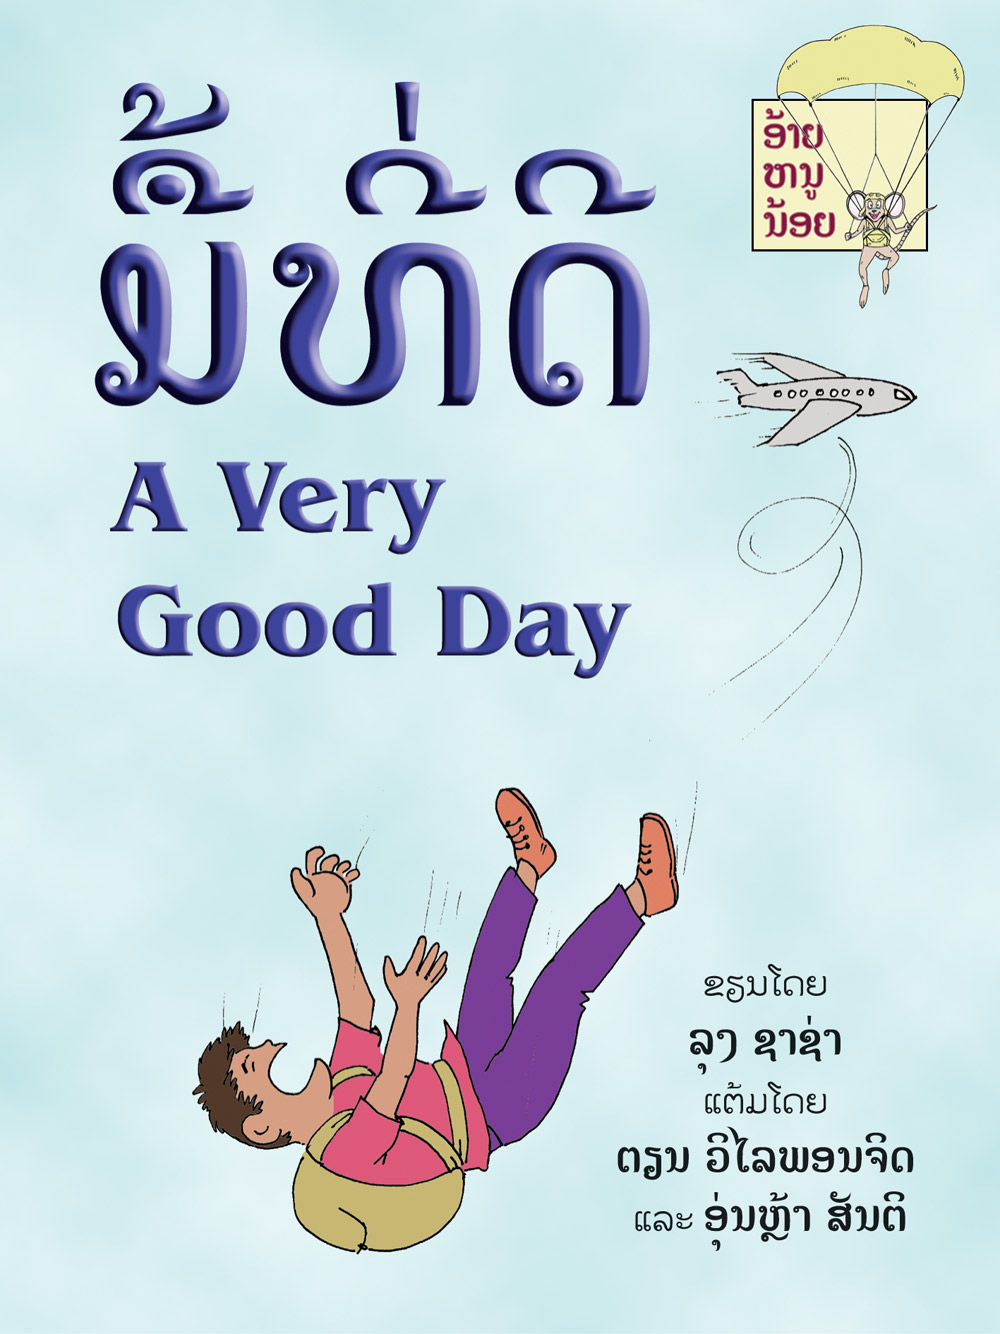 A Very Good Day large book cover, published in Lao and English